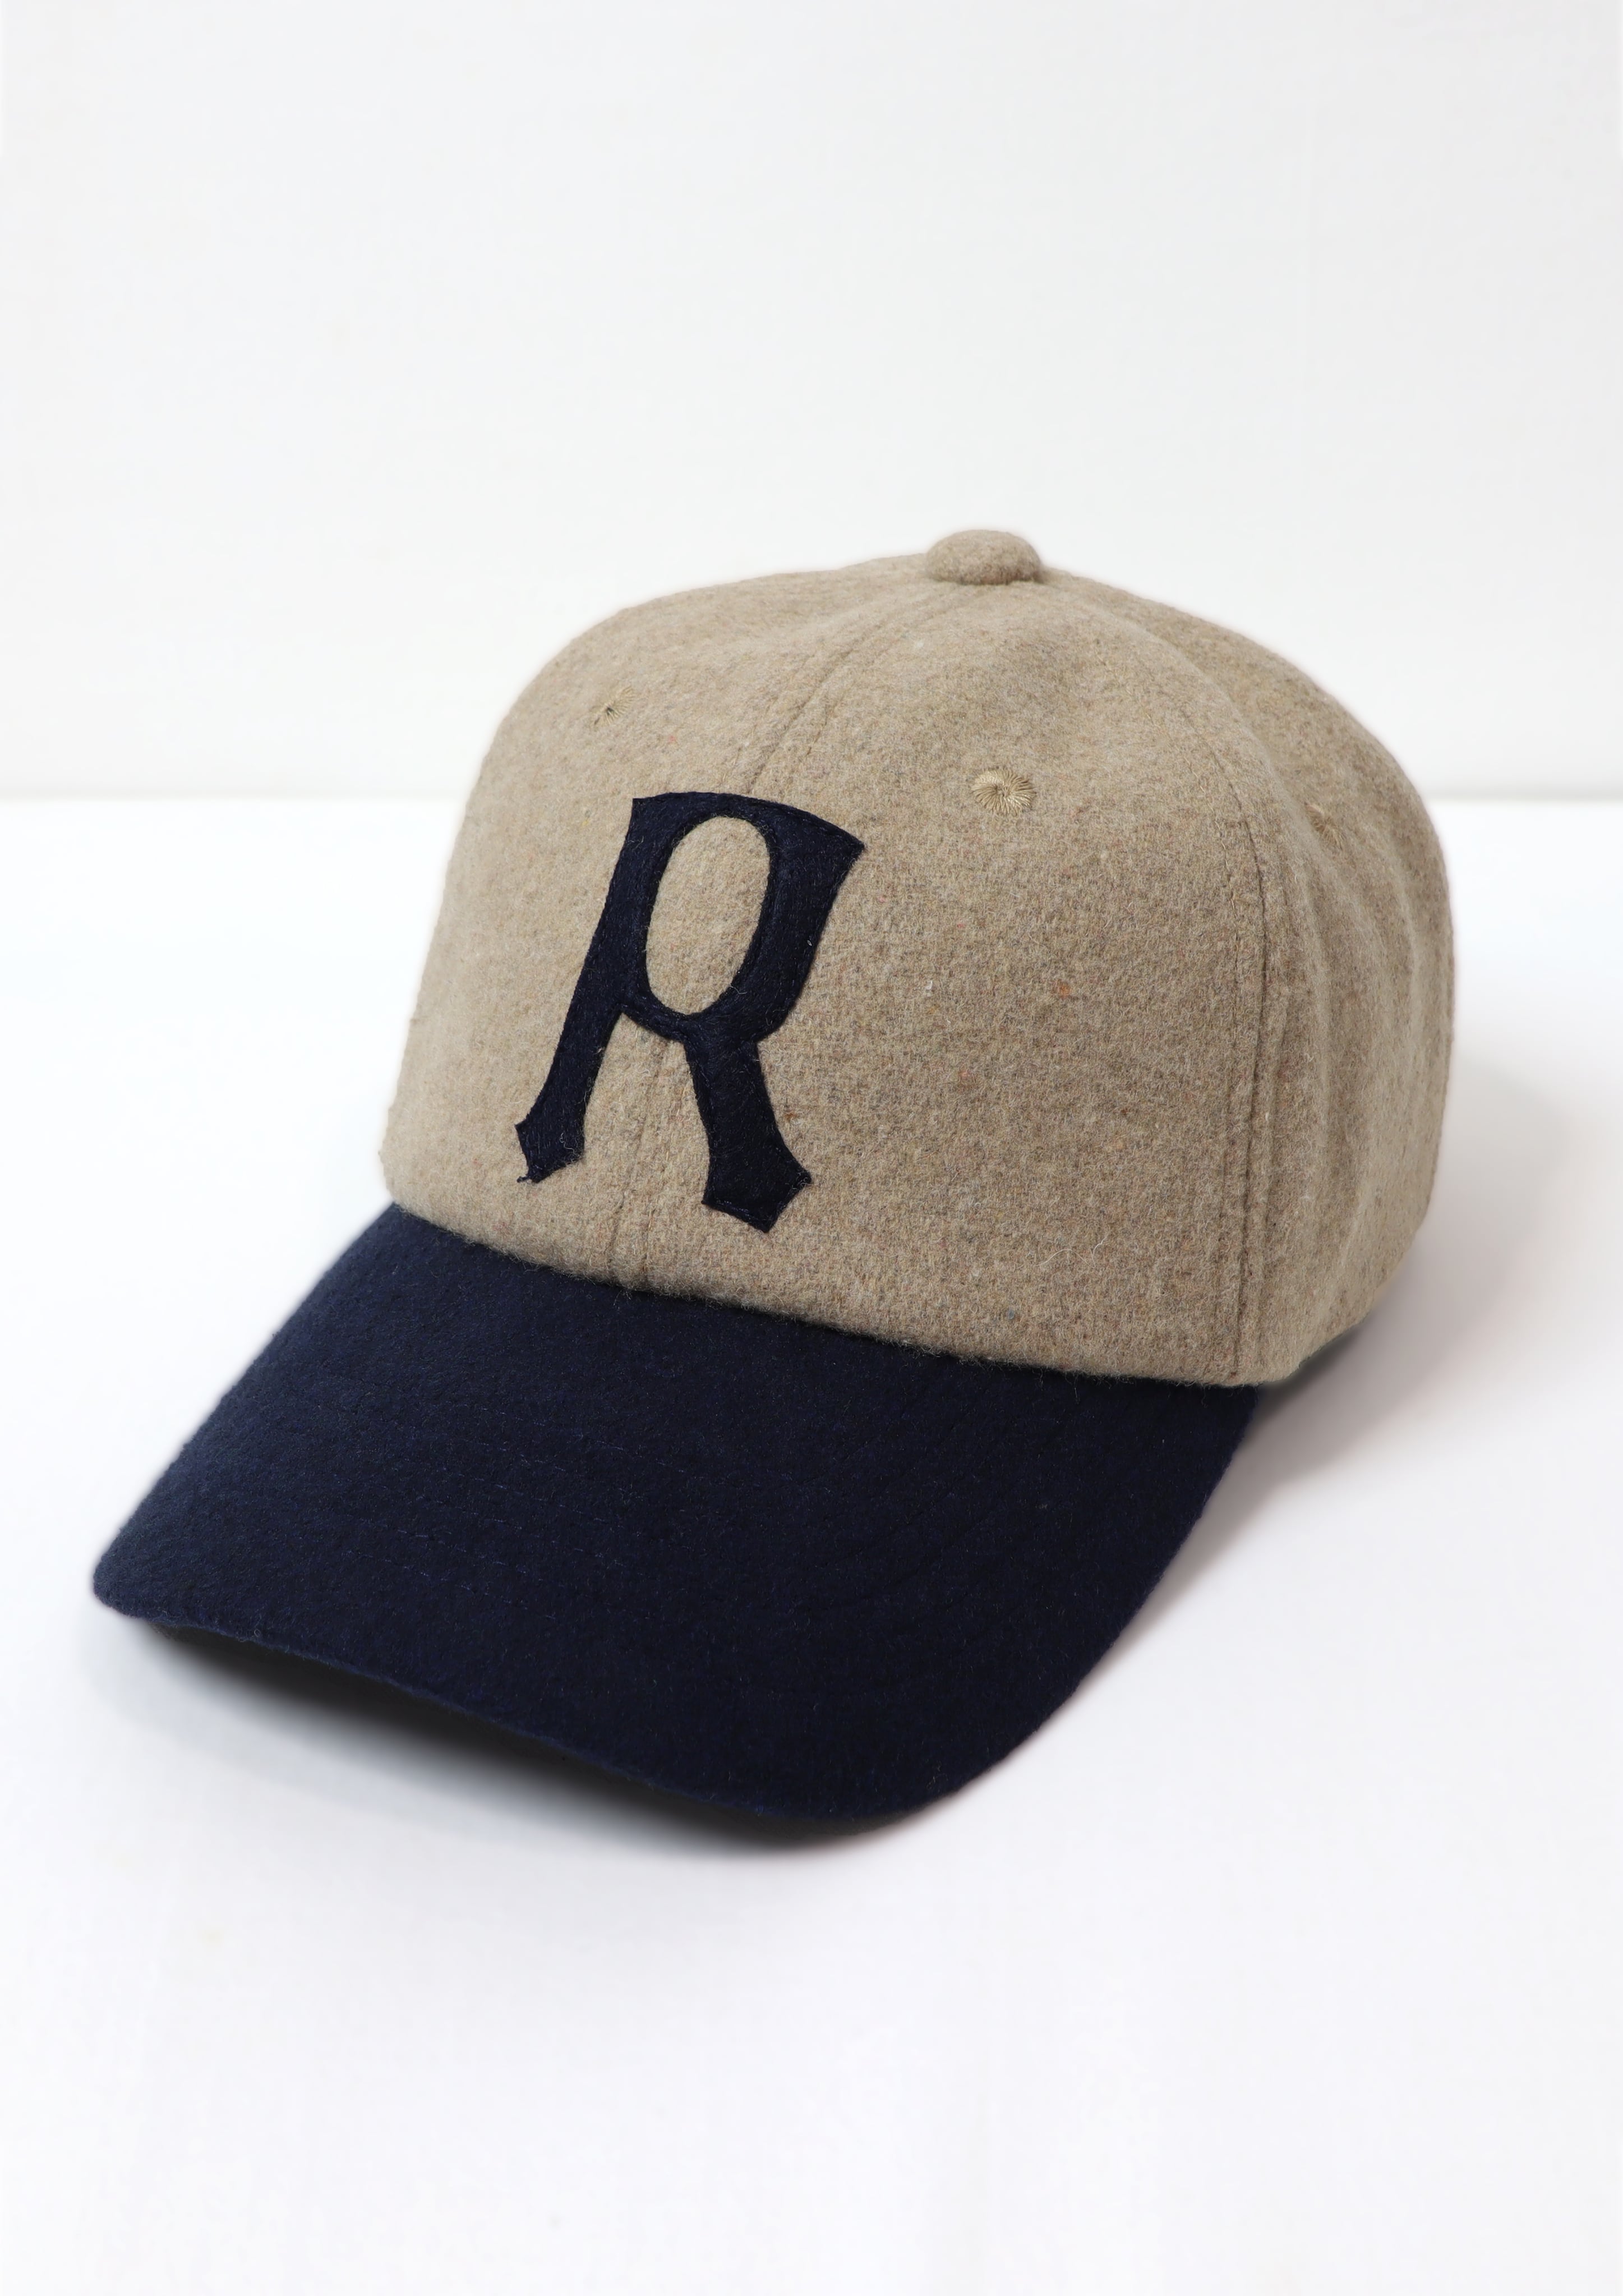 MAGNETIC PATCH CAP “尺” SAND-NAVY